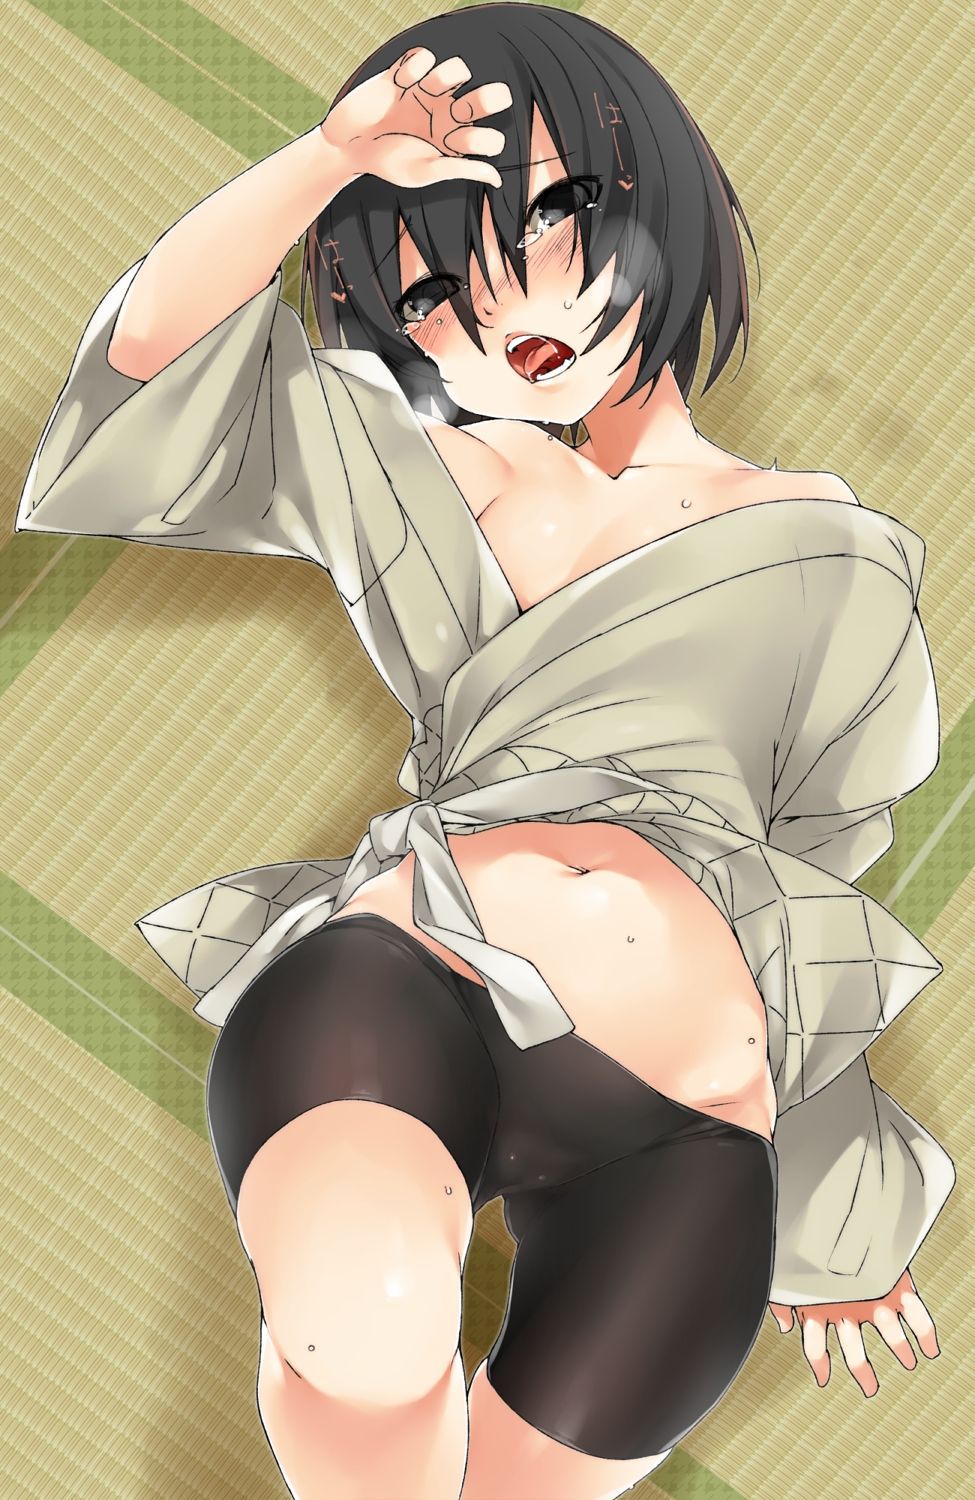 [Secondary] The second erotic image of a girl that spats is in close contact with the pitChile in the lower body of the 17 [spats] 16